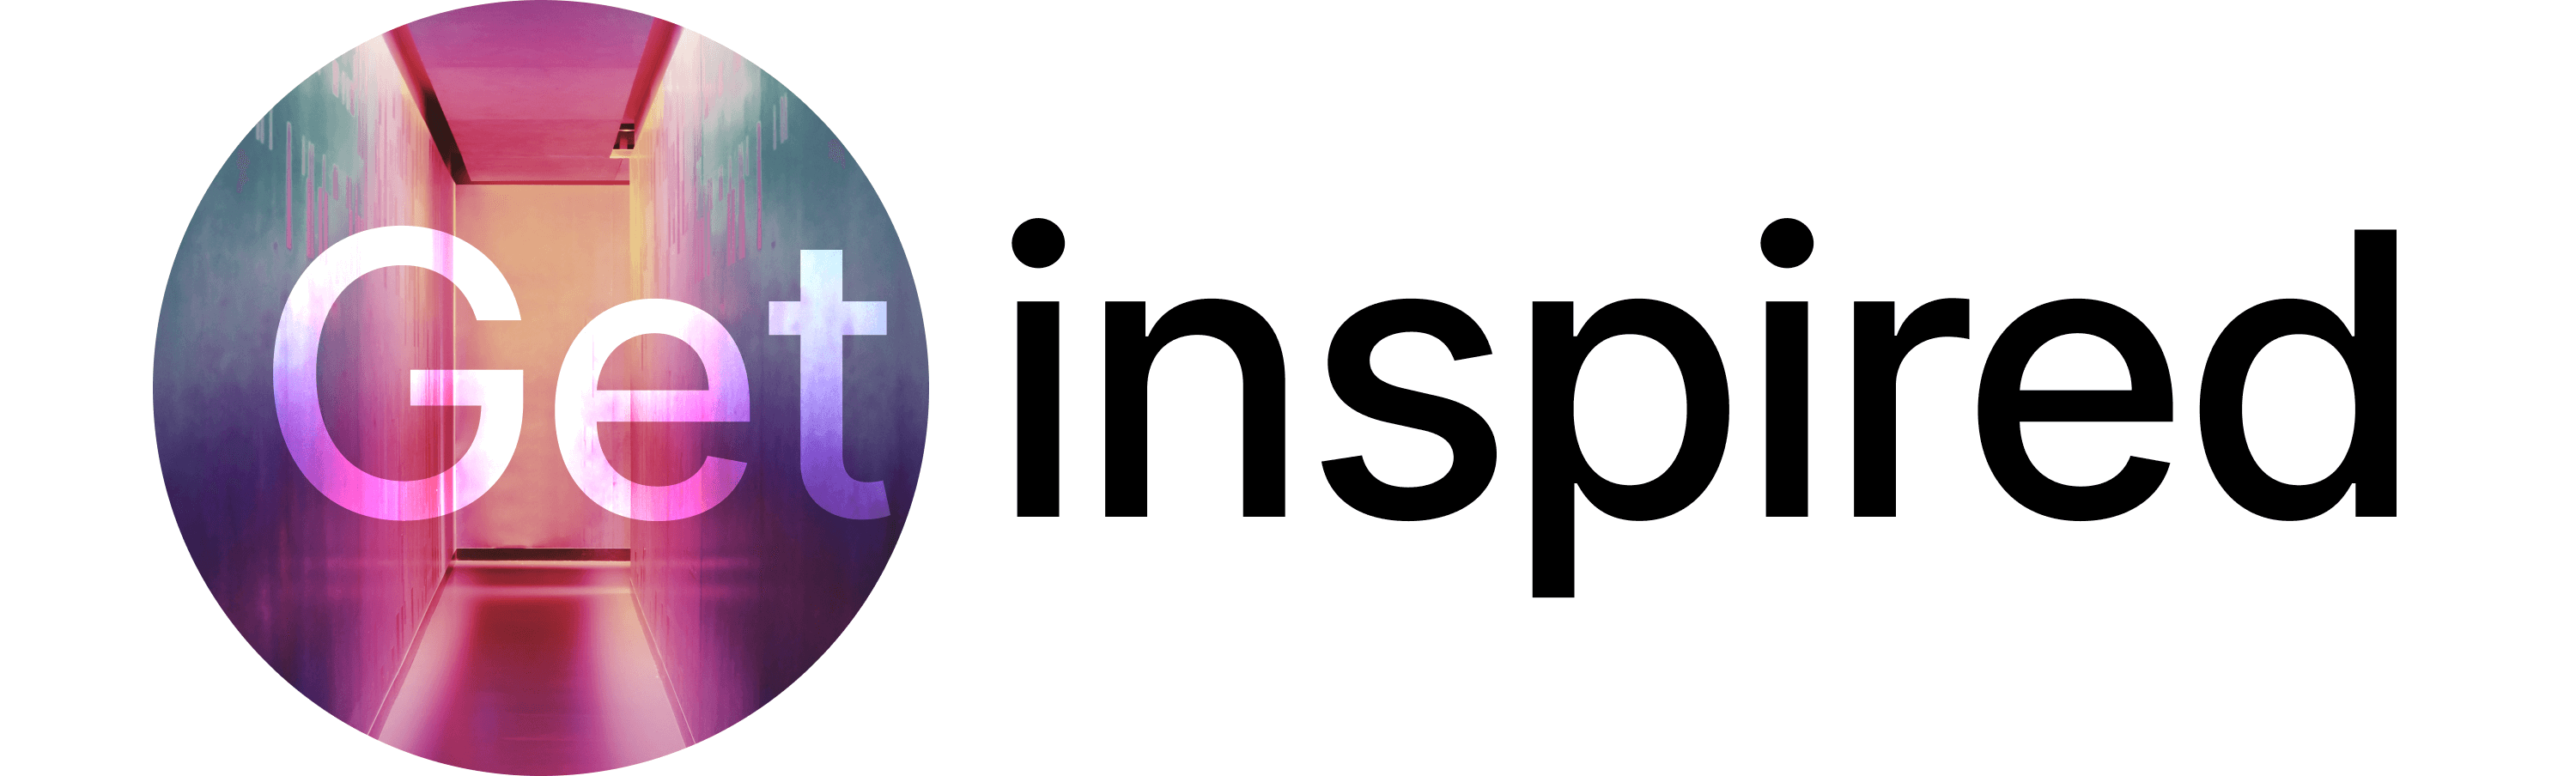 Styled header banner with the words "Get Inspired" on it.